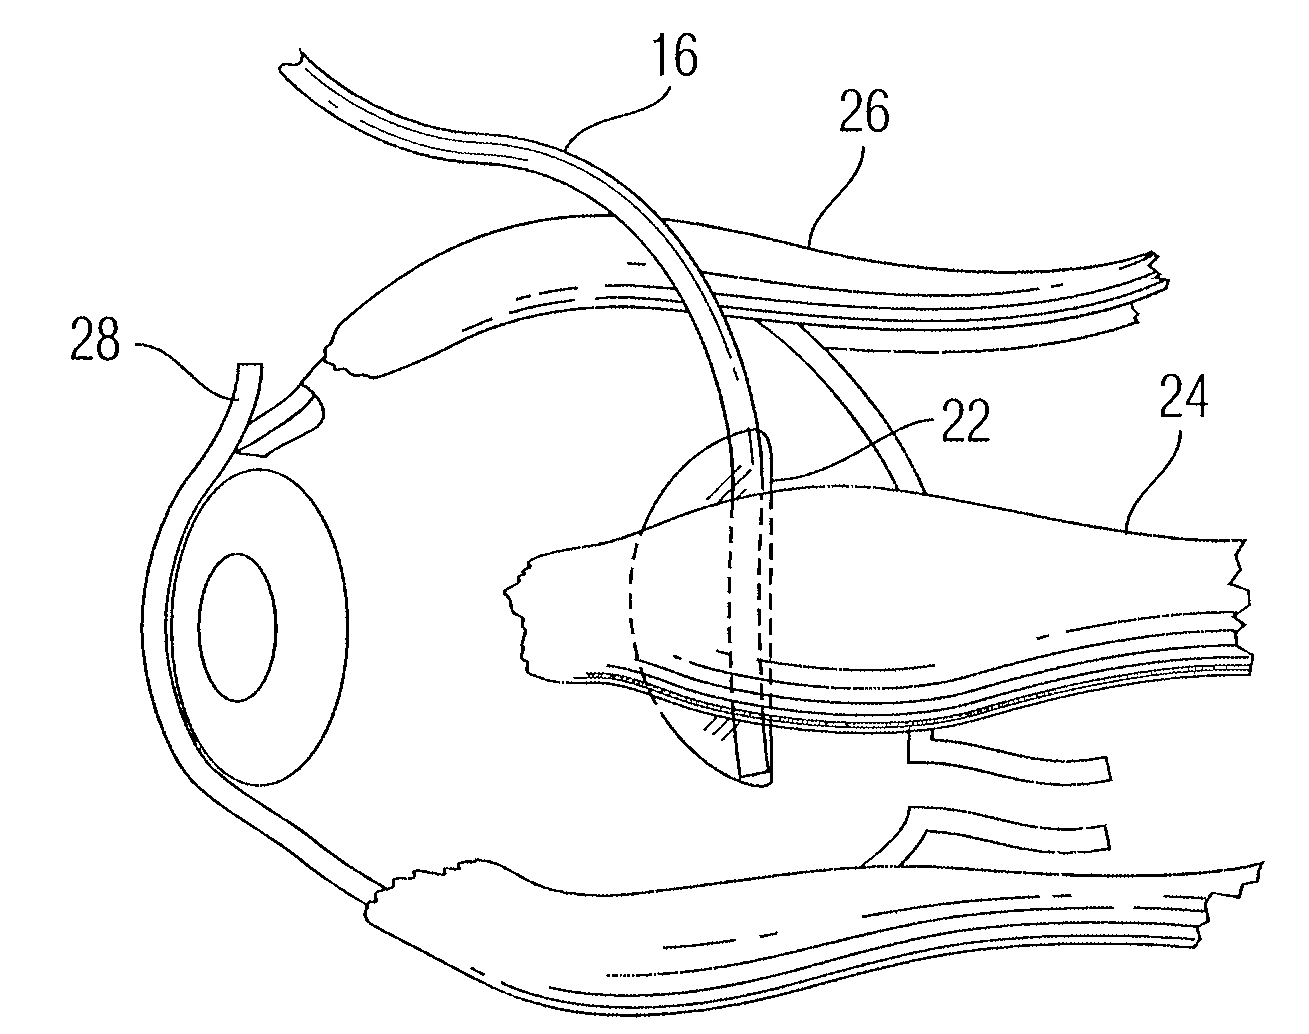 Implant for use in surgery for glaucoma and a method